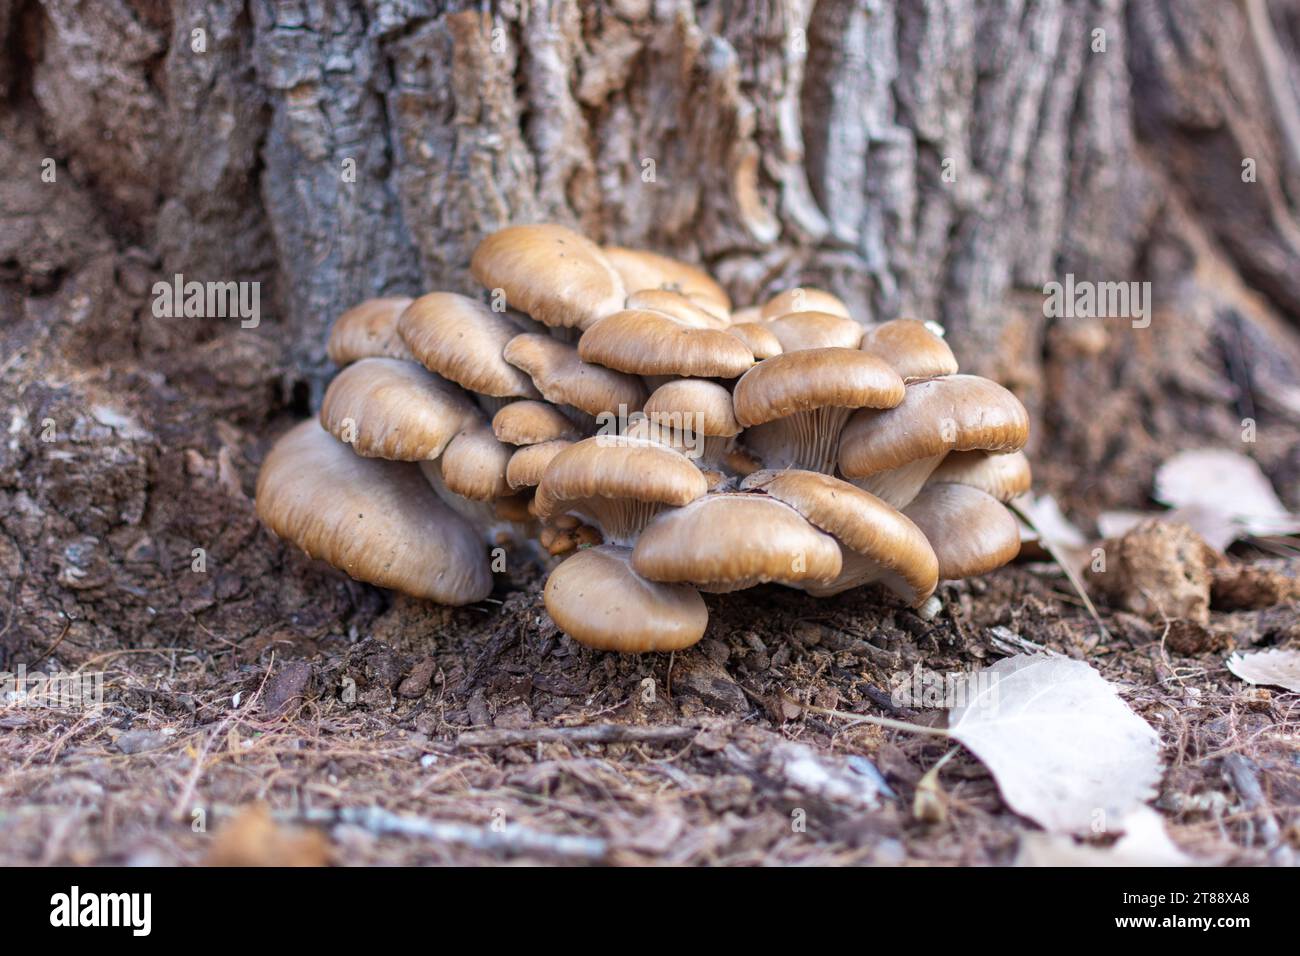 A cluster of mushrooms growing at the base of a tree in the forest. Stock Photo